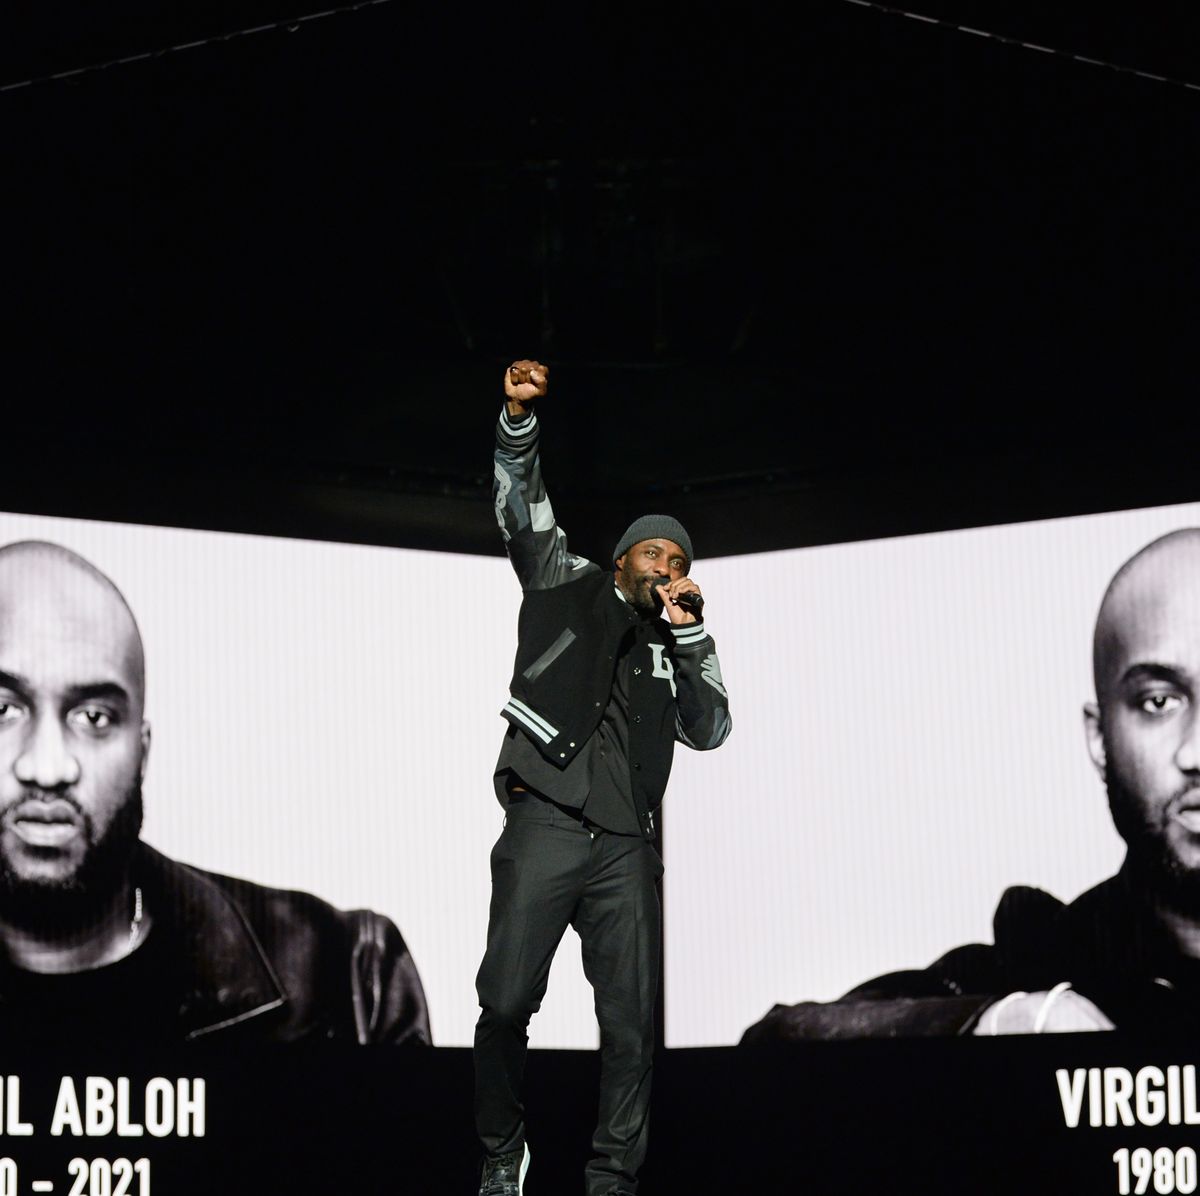 A Tribute to Virgil Abloh Is the Centerpiece of the Fashion Awards